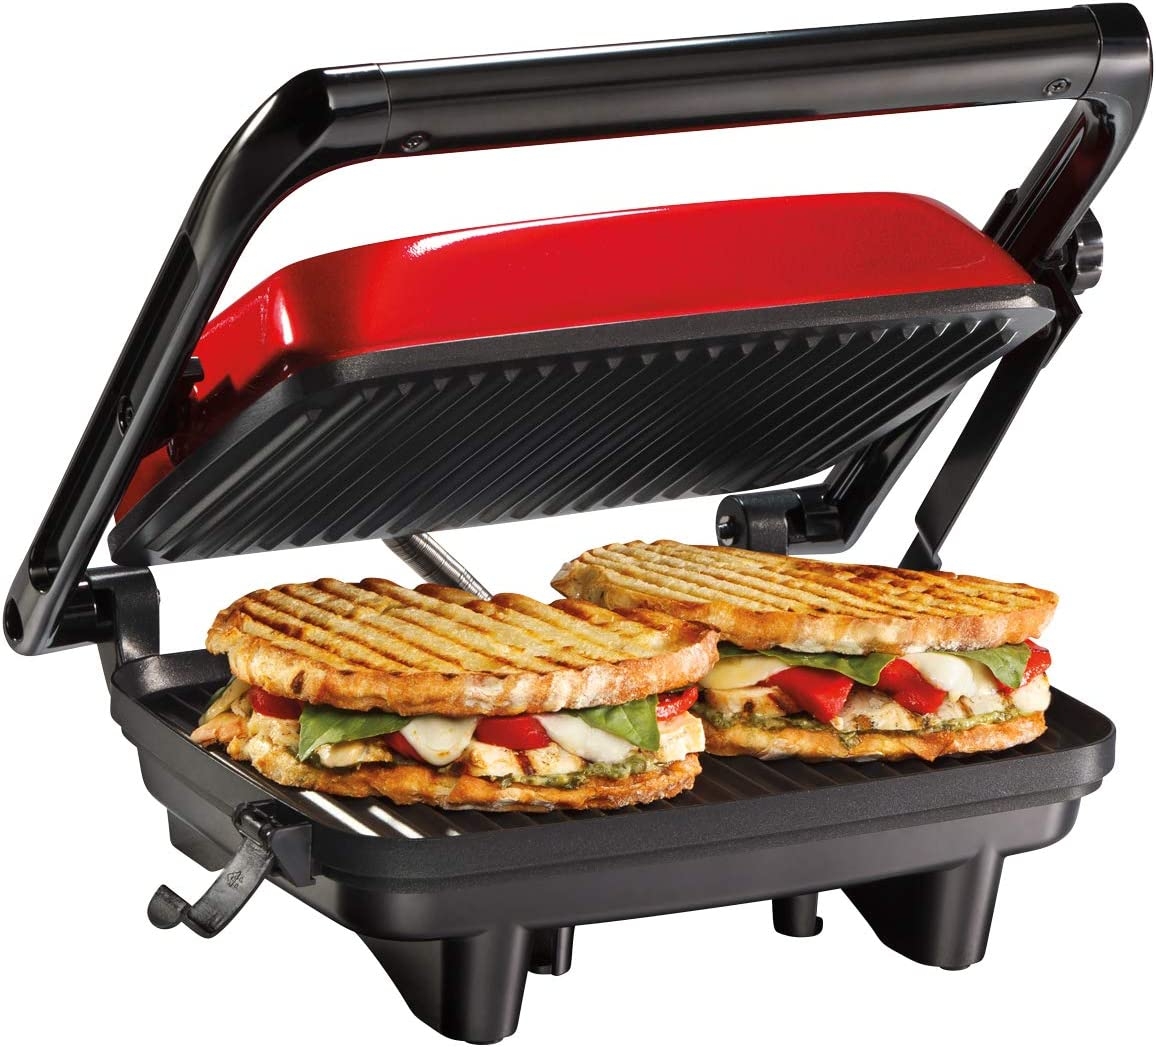 Hamilton Beach Electric Panini Press Grill with Locking Lid, Opens 180 Degrees for Any Sandwich Thickness, Nonstick 8″ X 10″